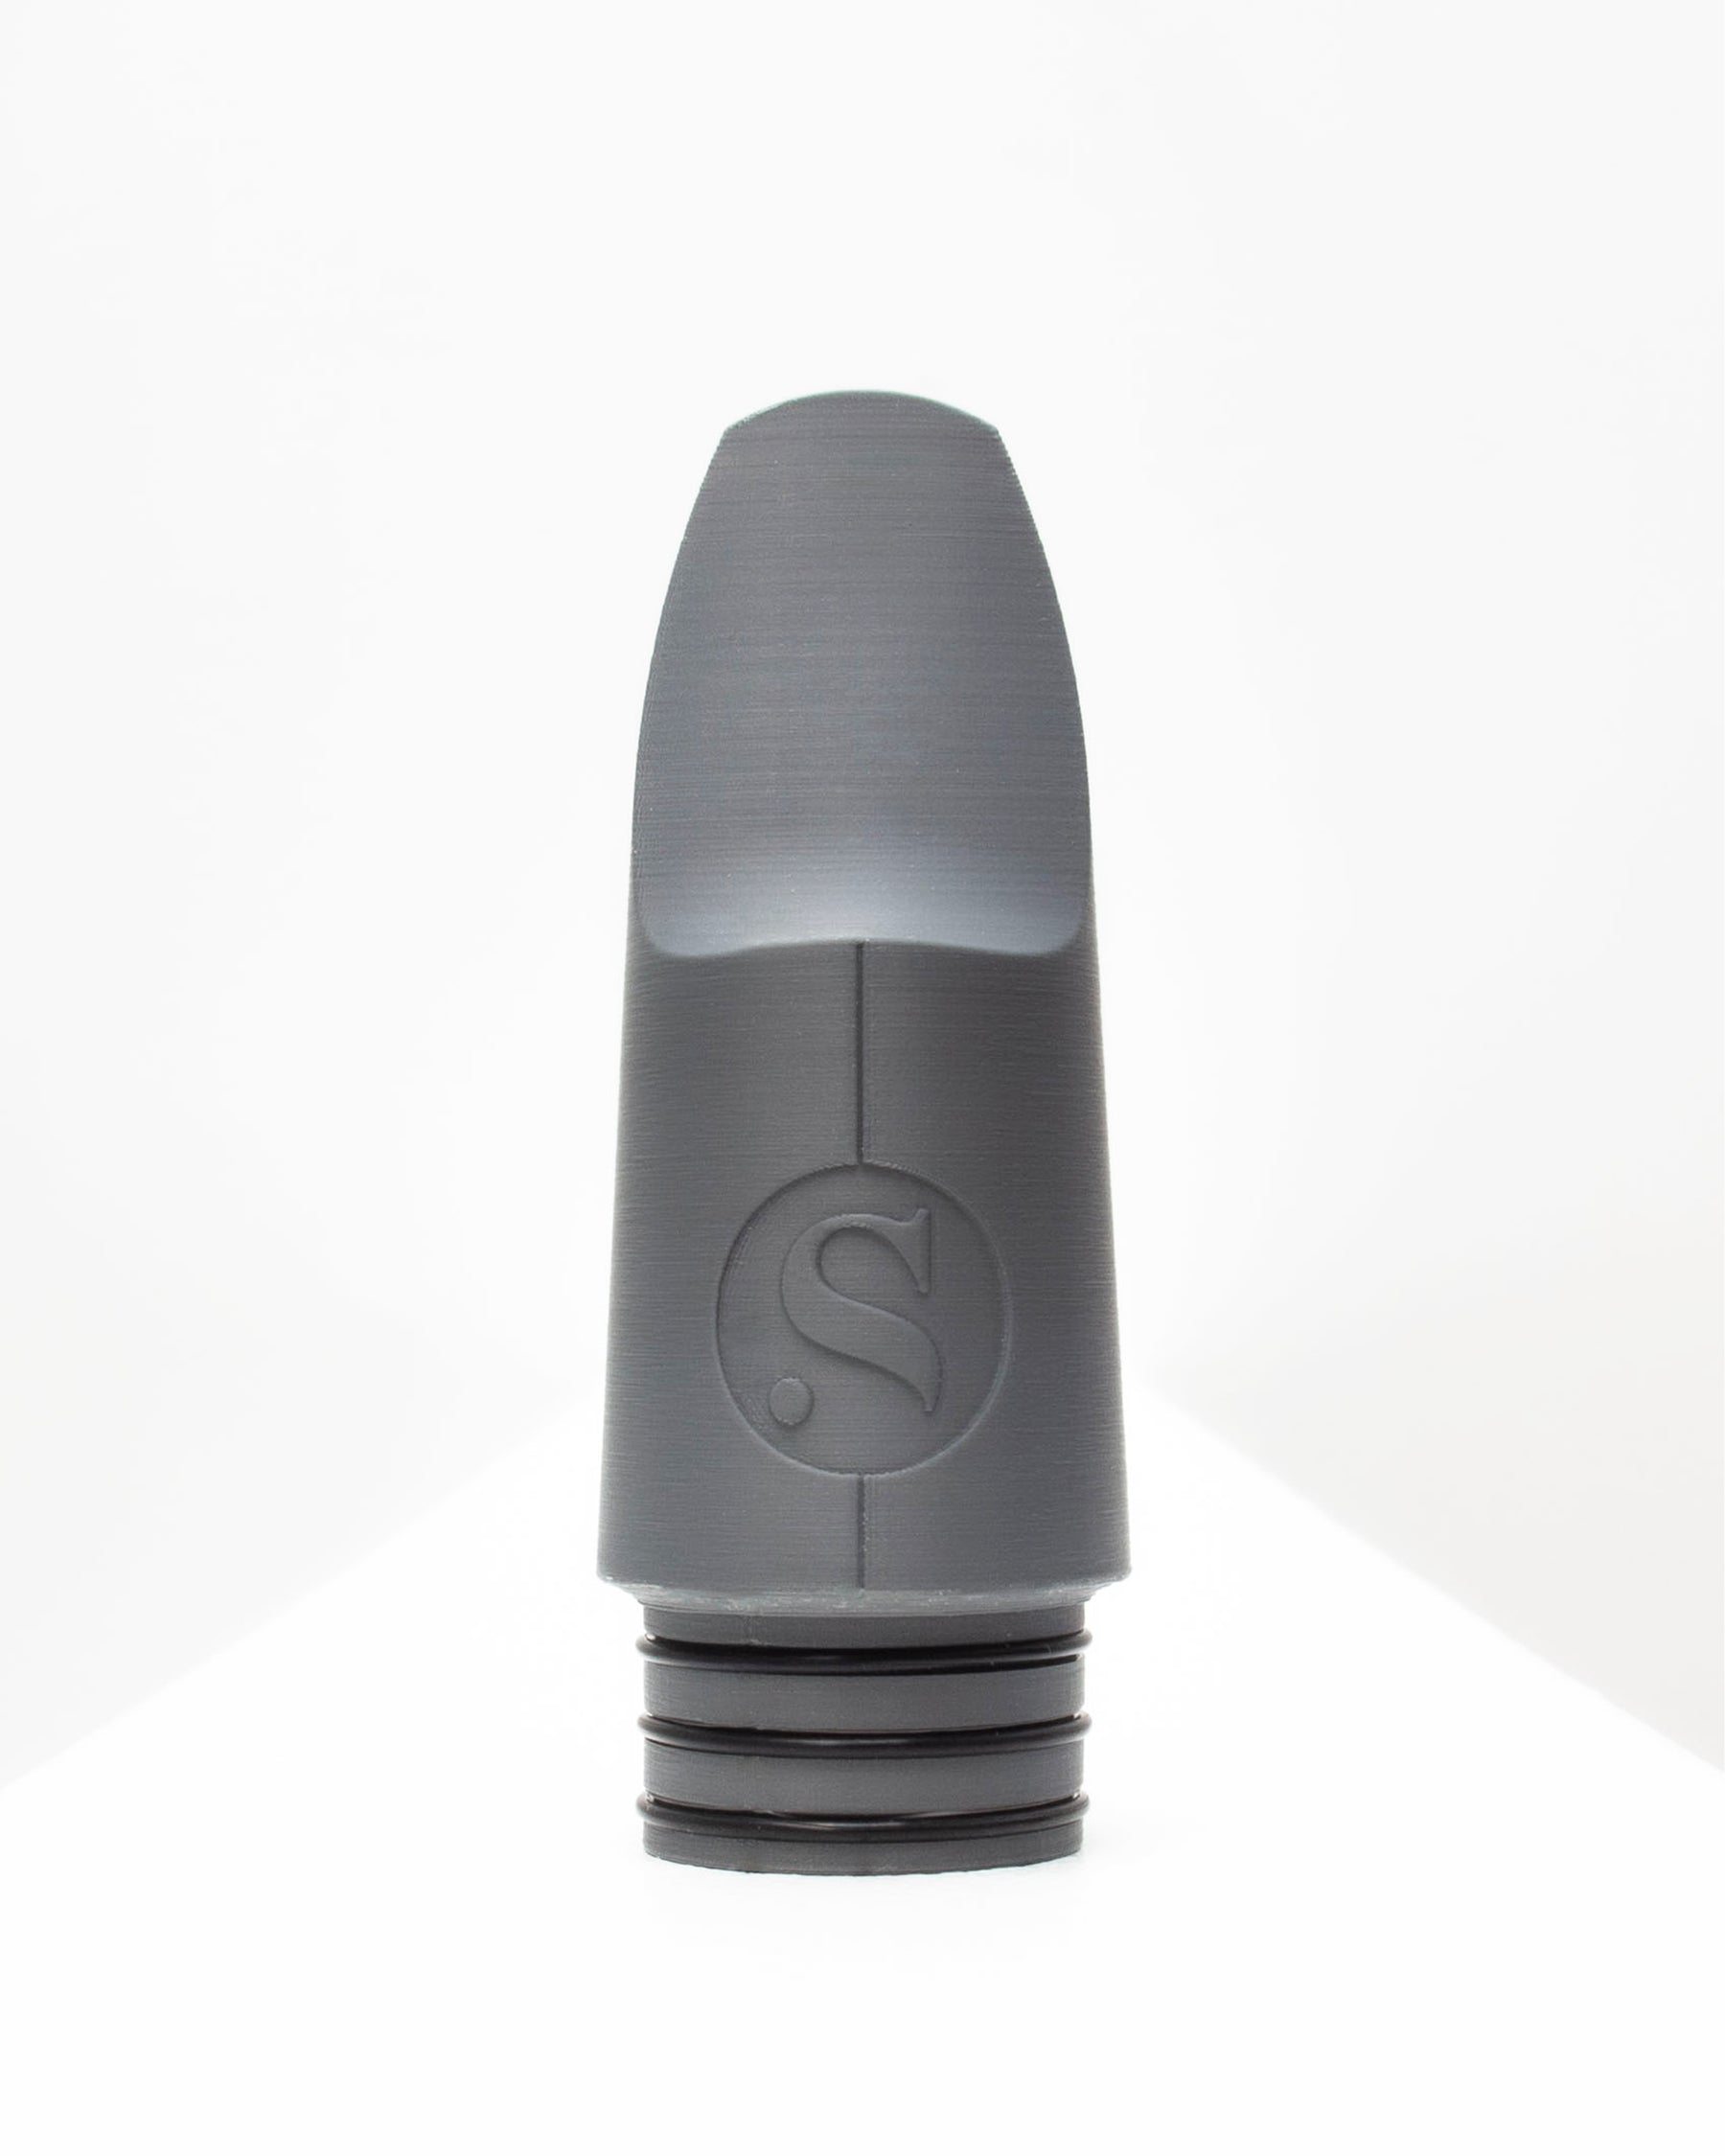 Bass Signature Clarinet mouthpiece - Insaneintherain by Syos - Anthracite Metal